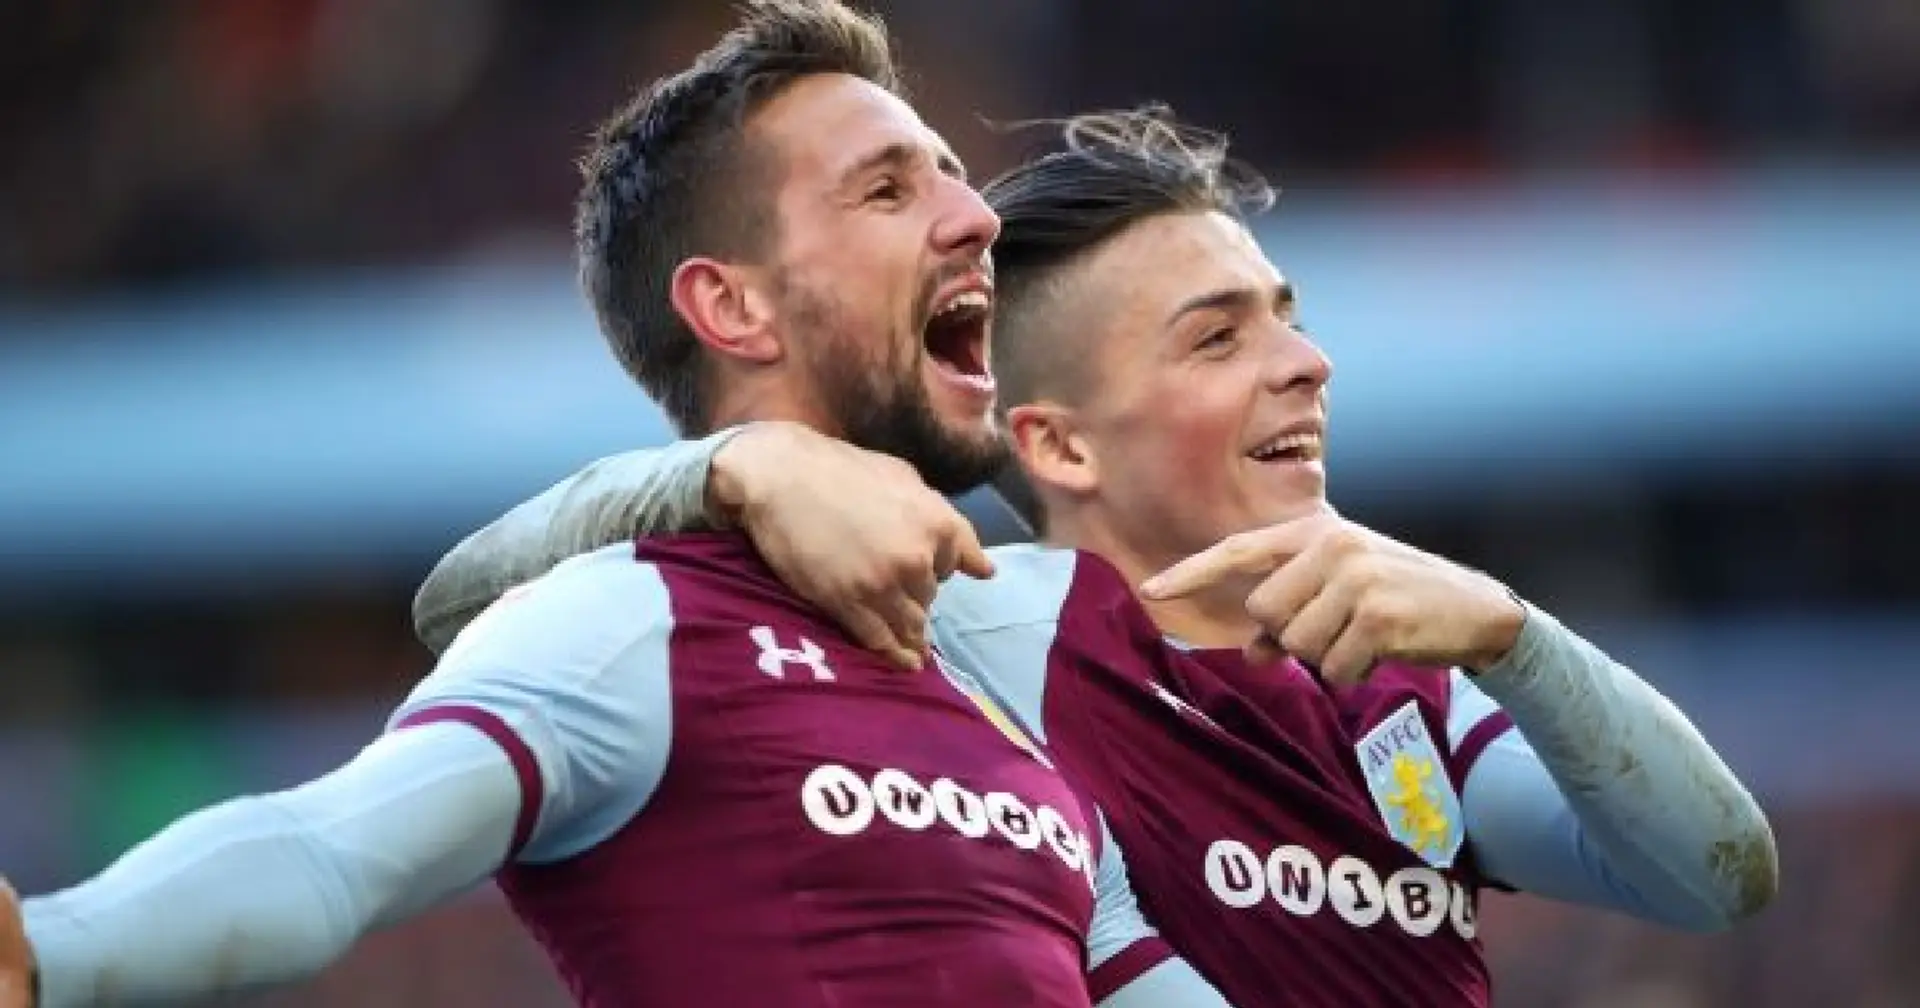 'It's going to be a tough summer for Jack': Aston Villa star Conor Hourihane on Grealish's future